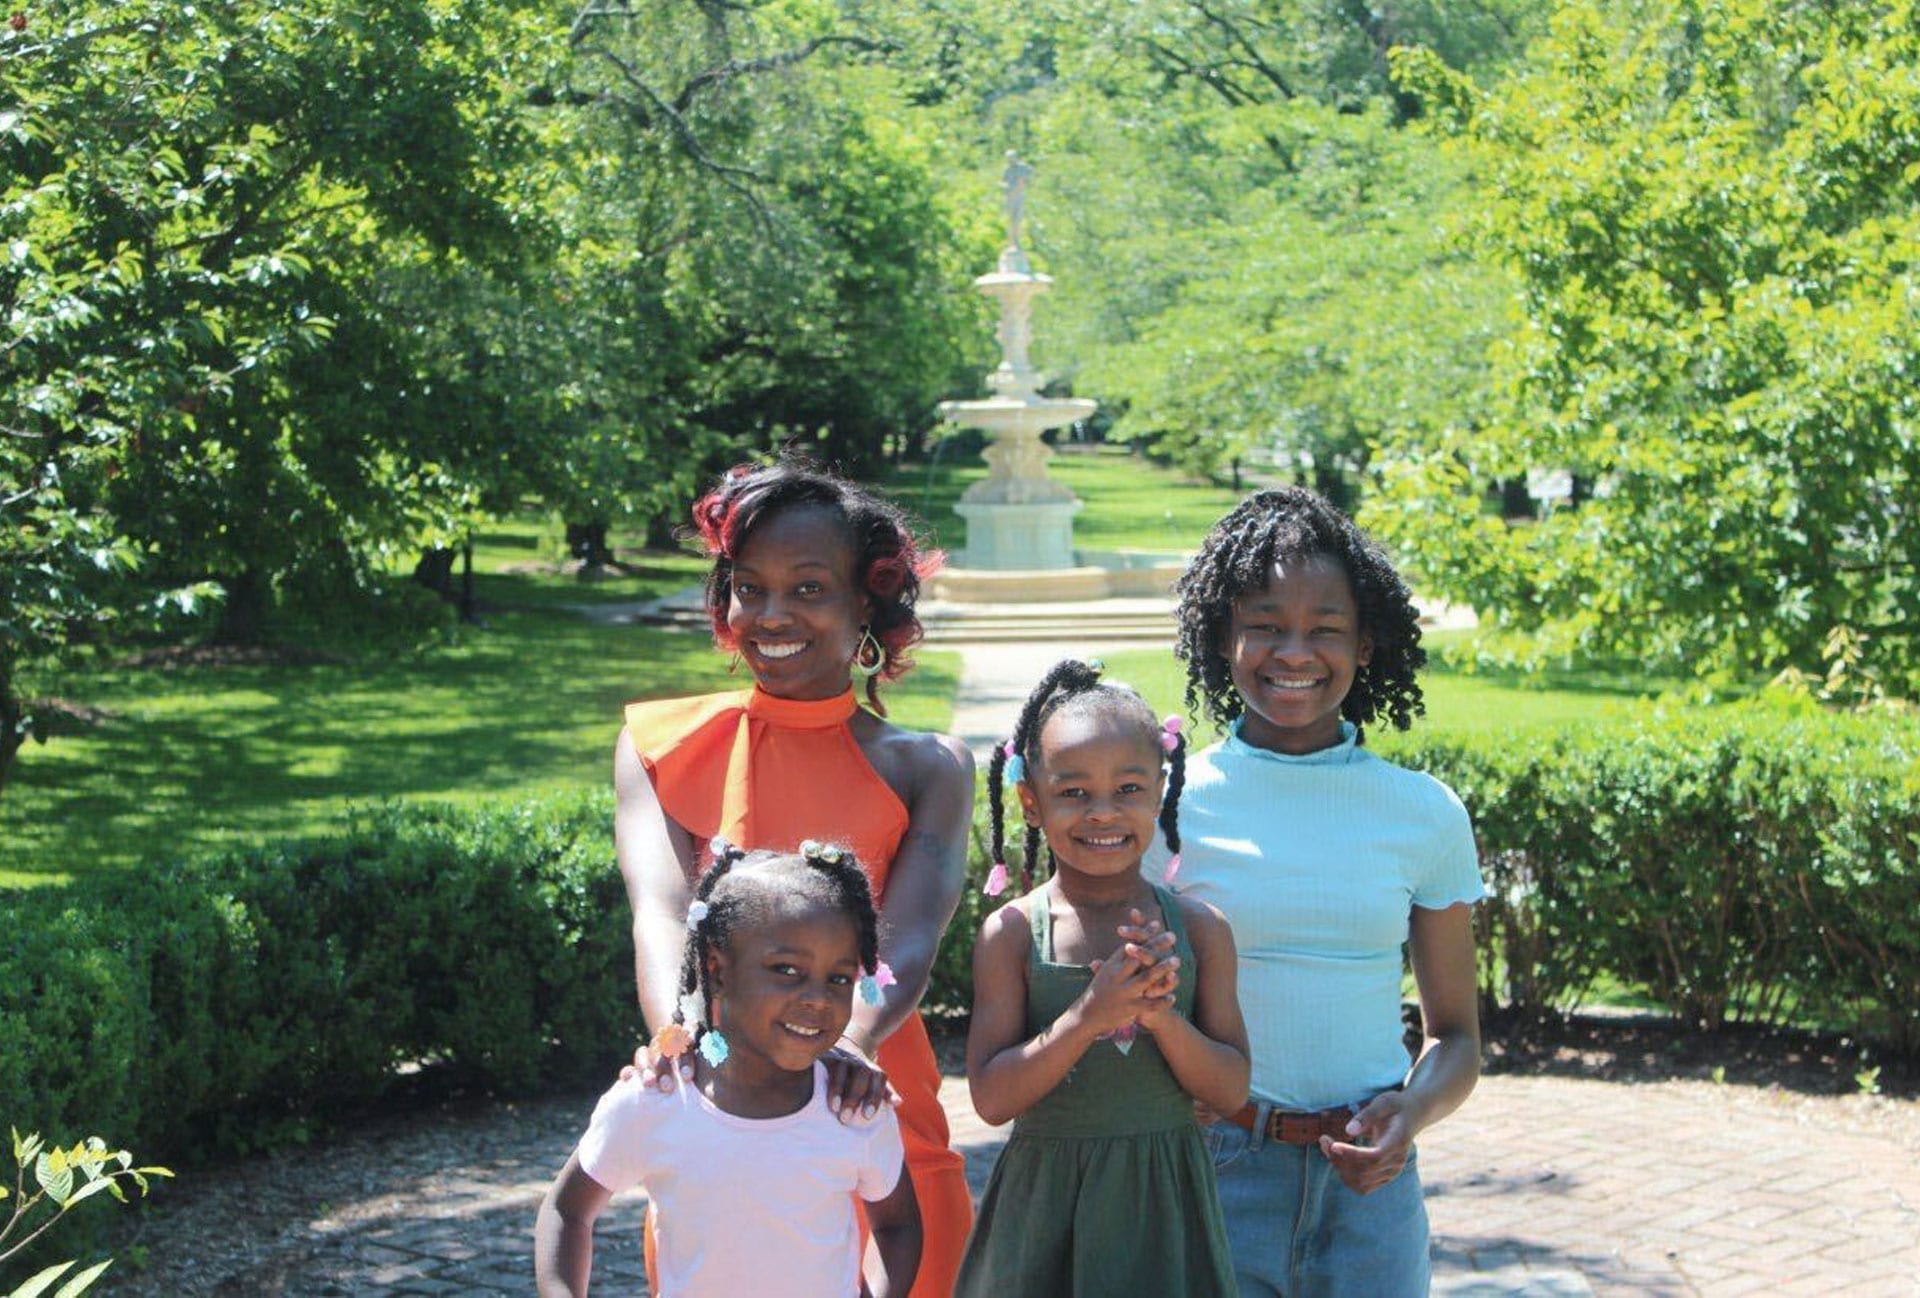 Shané Darby and her children.